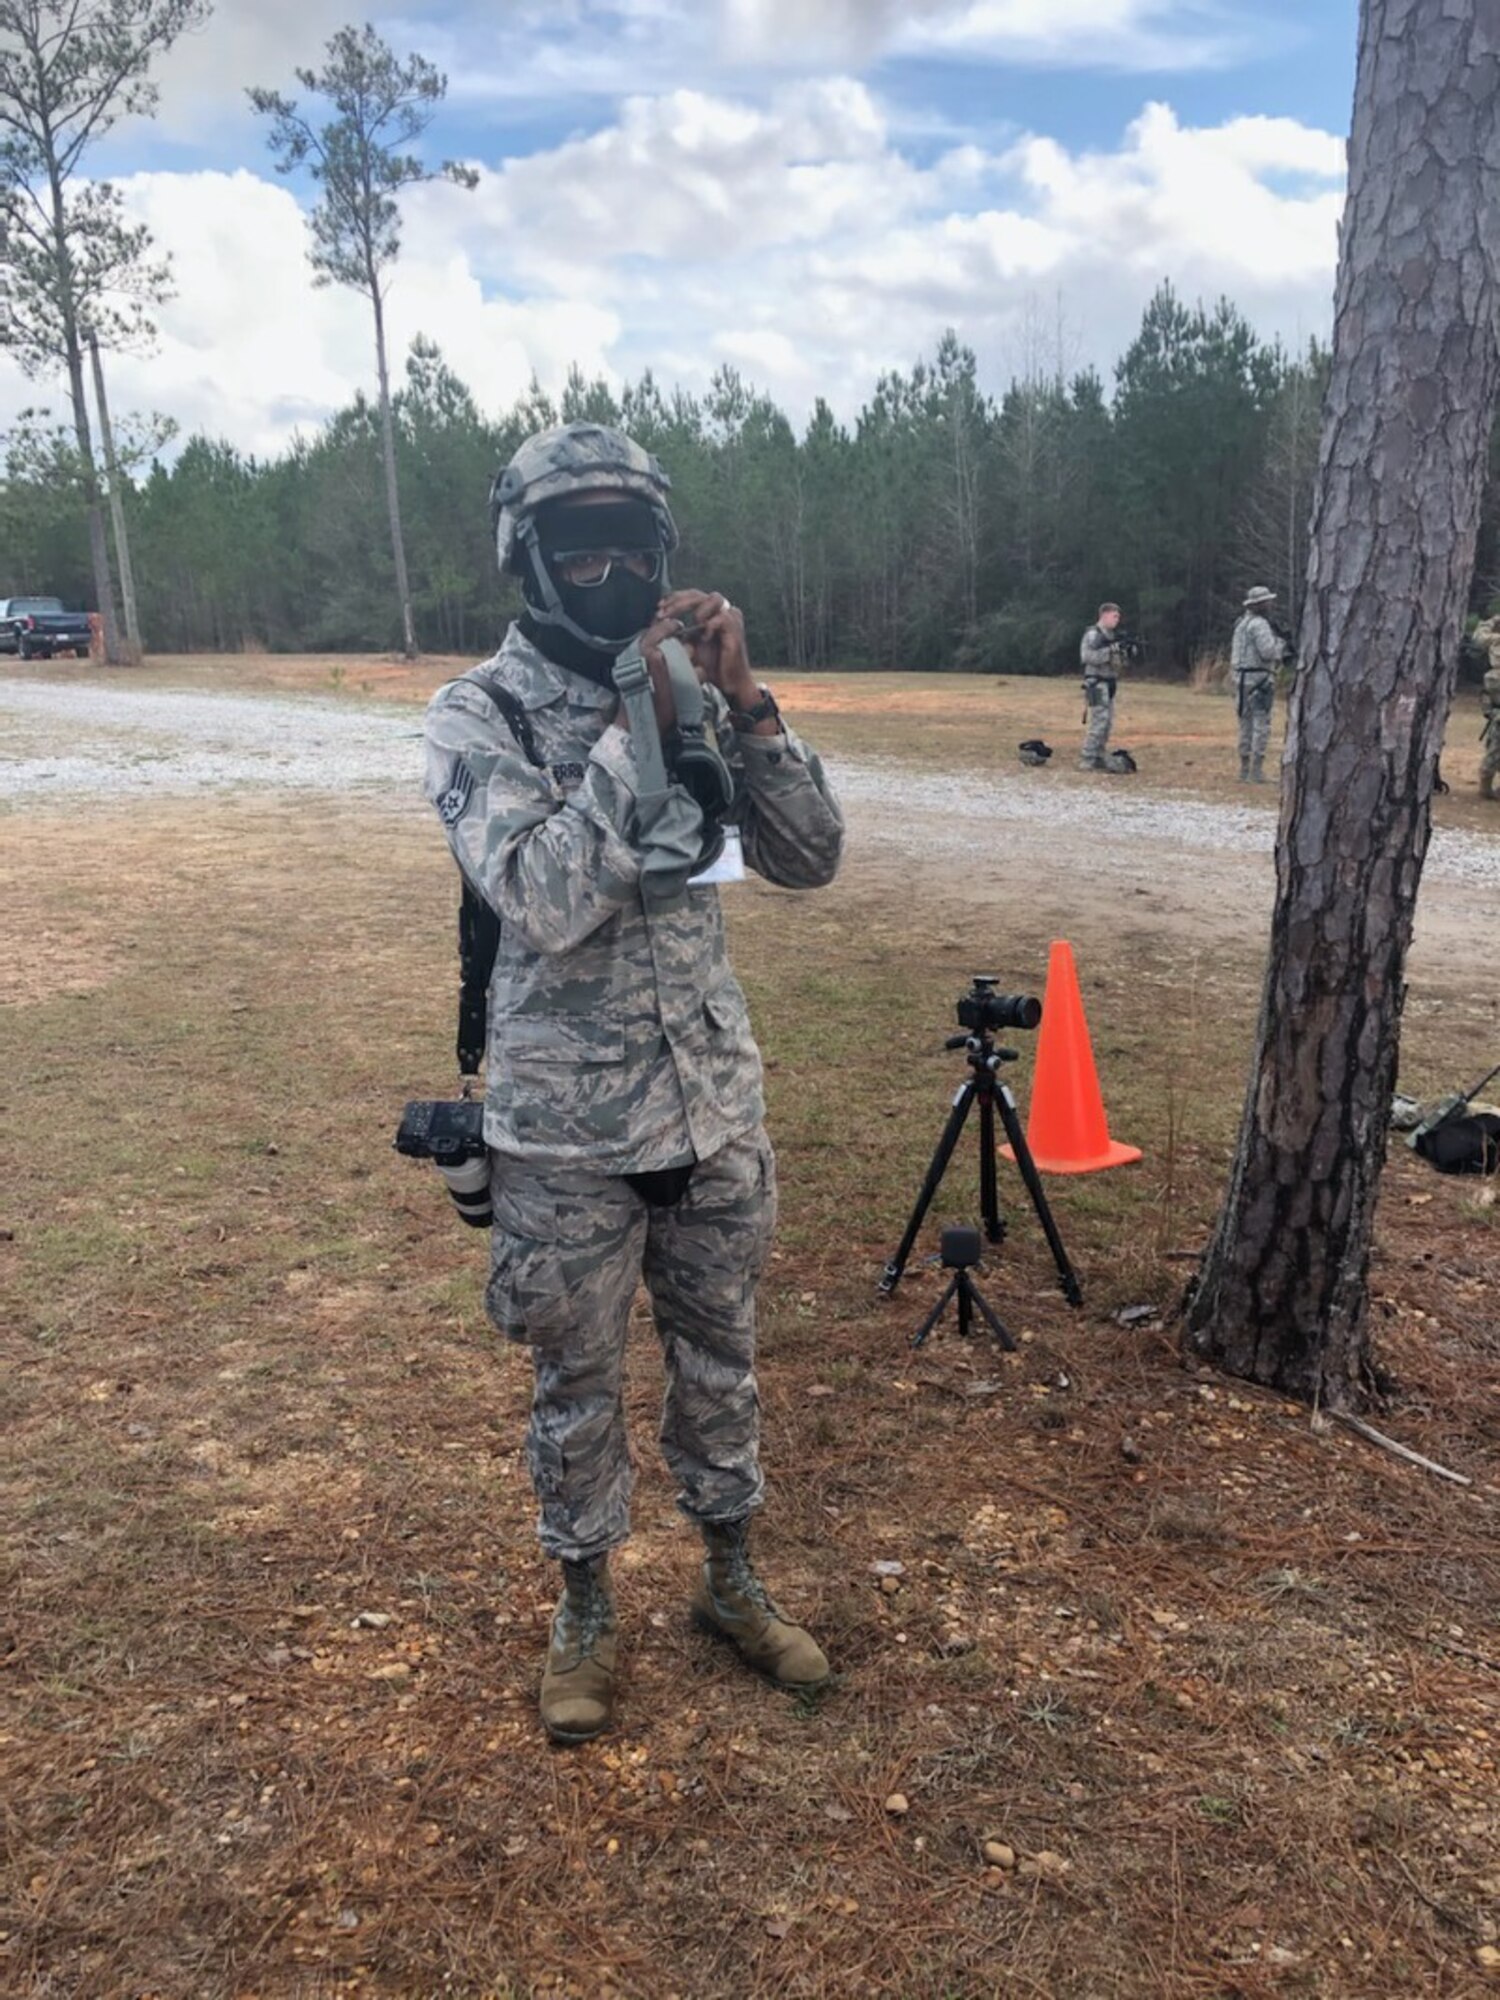 Staff Sgt. Shelton Sherrill, 403rd Wing Public Affairs specialist, dons his Kevlar helmet during the field exercise Operation Southern Comfort Jan. 16, 2020, at Camp Shelby, Mississippi. Sherrill said that being a traditional reservist in the PA career field enables him to be creative with his work and it serves as an outlet to relieve stress and brings joy.  (U.S. Air Force photo by Maj. Jonathan Brady)